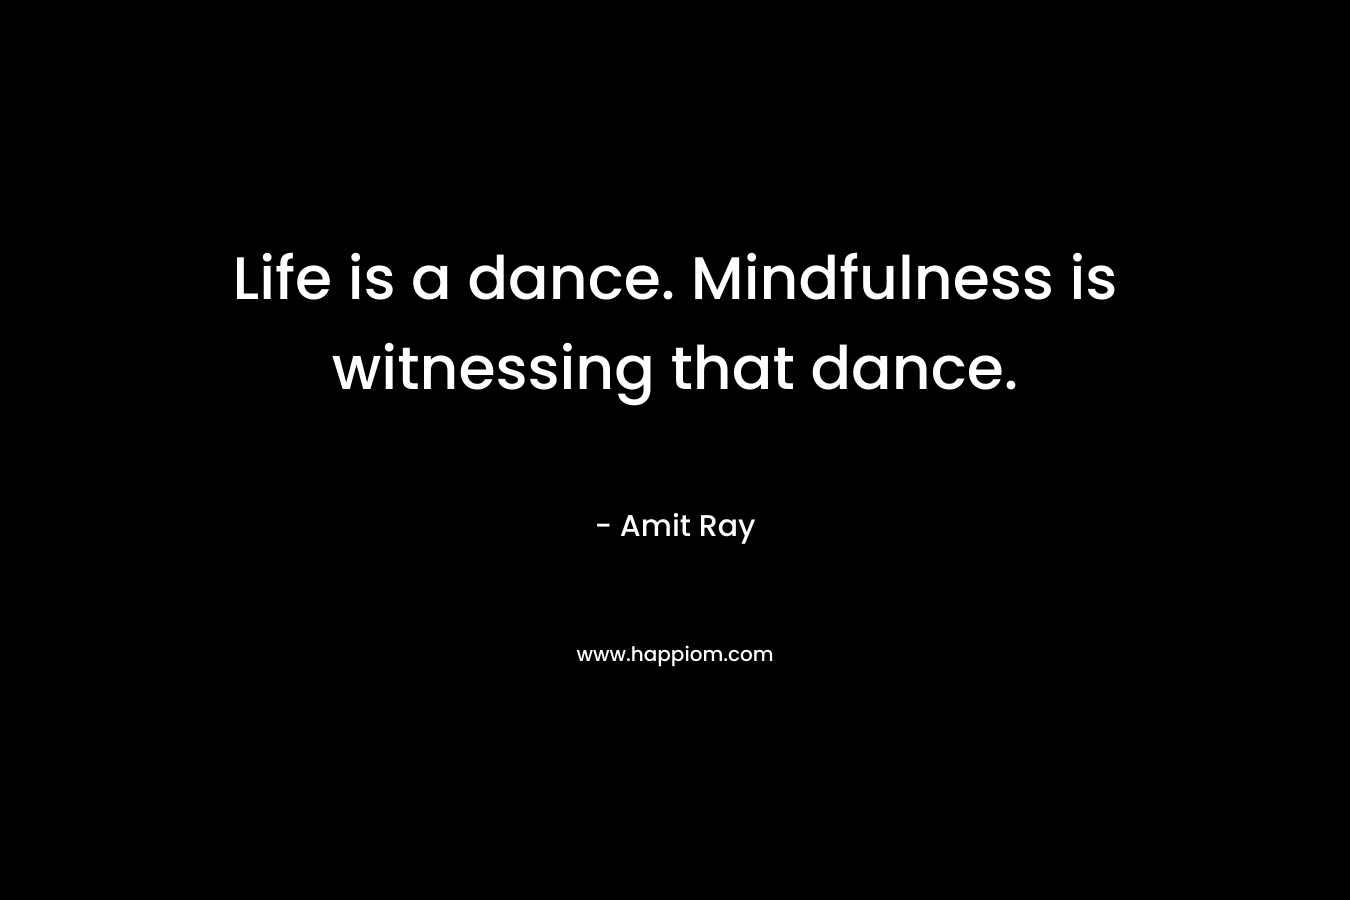 Life is a dance. Mindfulness is witnessing that dance.